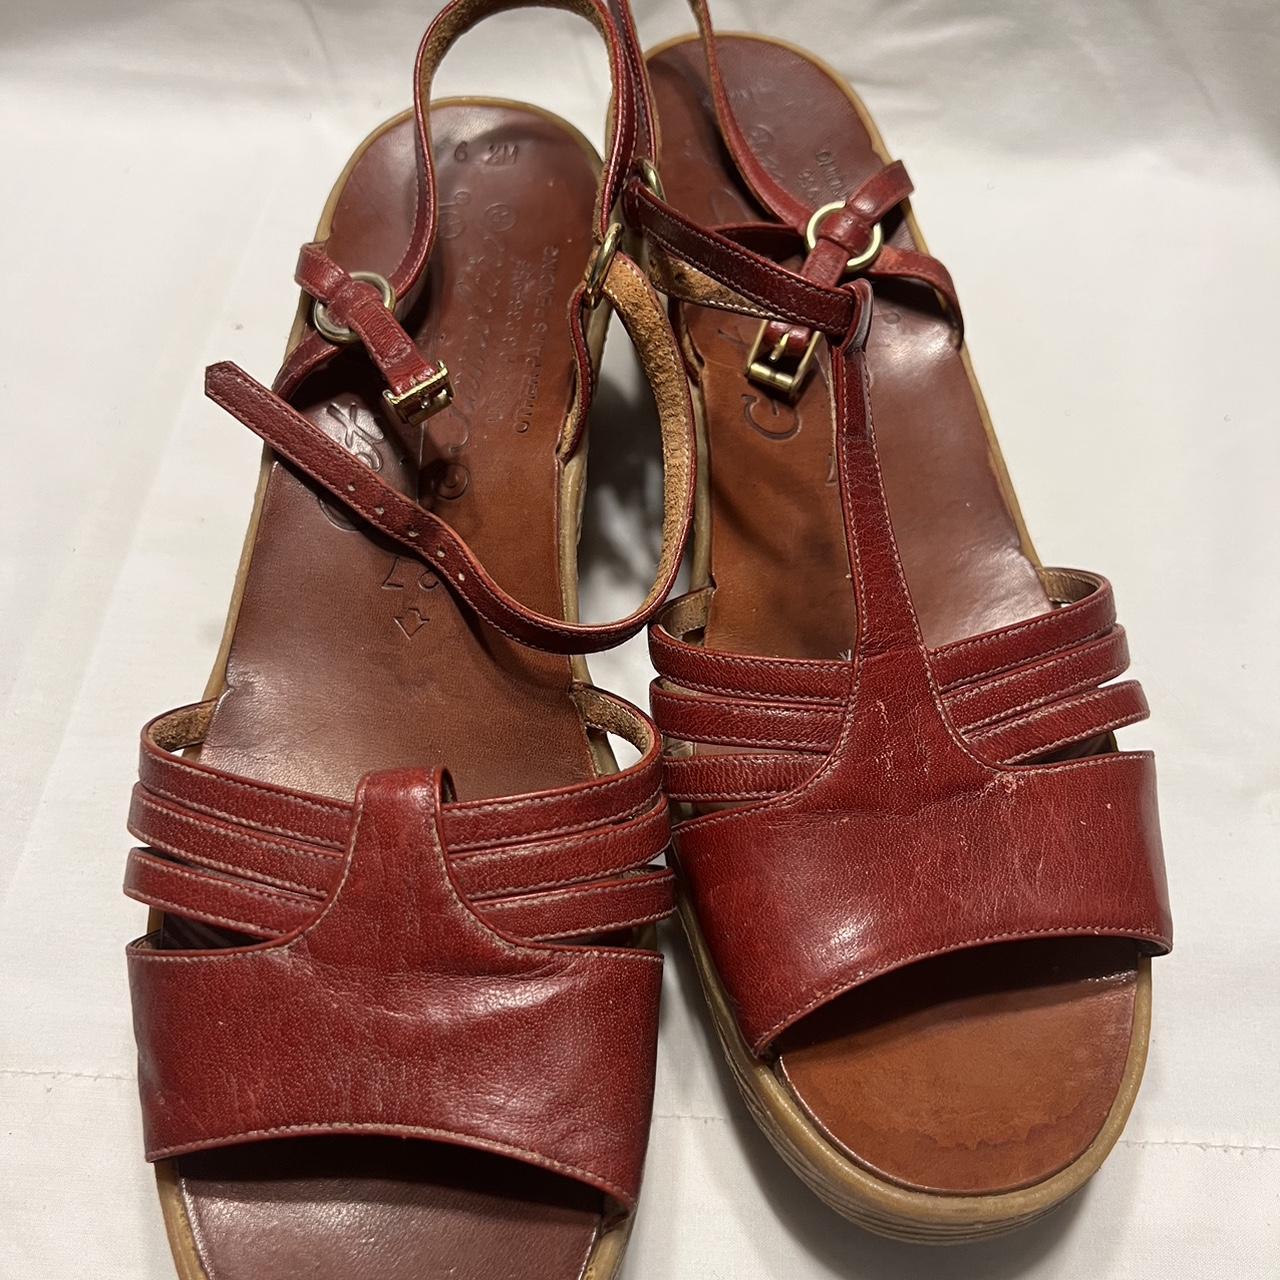 Buy 70s Sandals Online In India - Etsy India